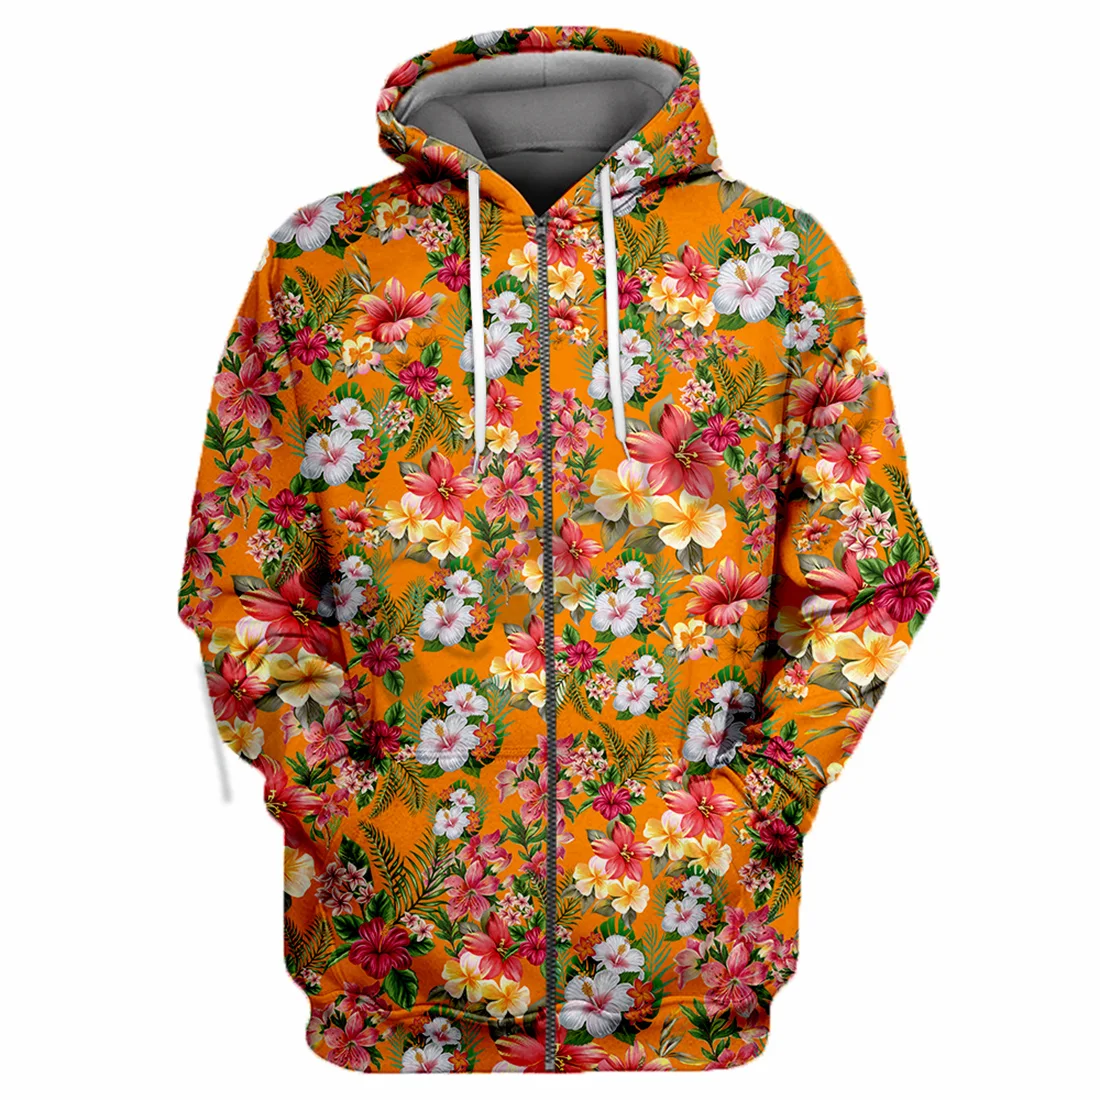 

Morning Glory Colorful Flowers 3D All Over Printed Full Body Men's Jacket Harajuku Hooded Unisex Casual Street Sweatshirt Hombre